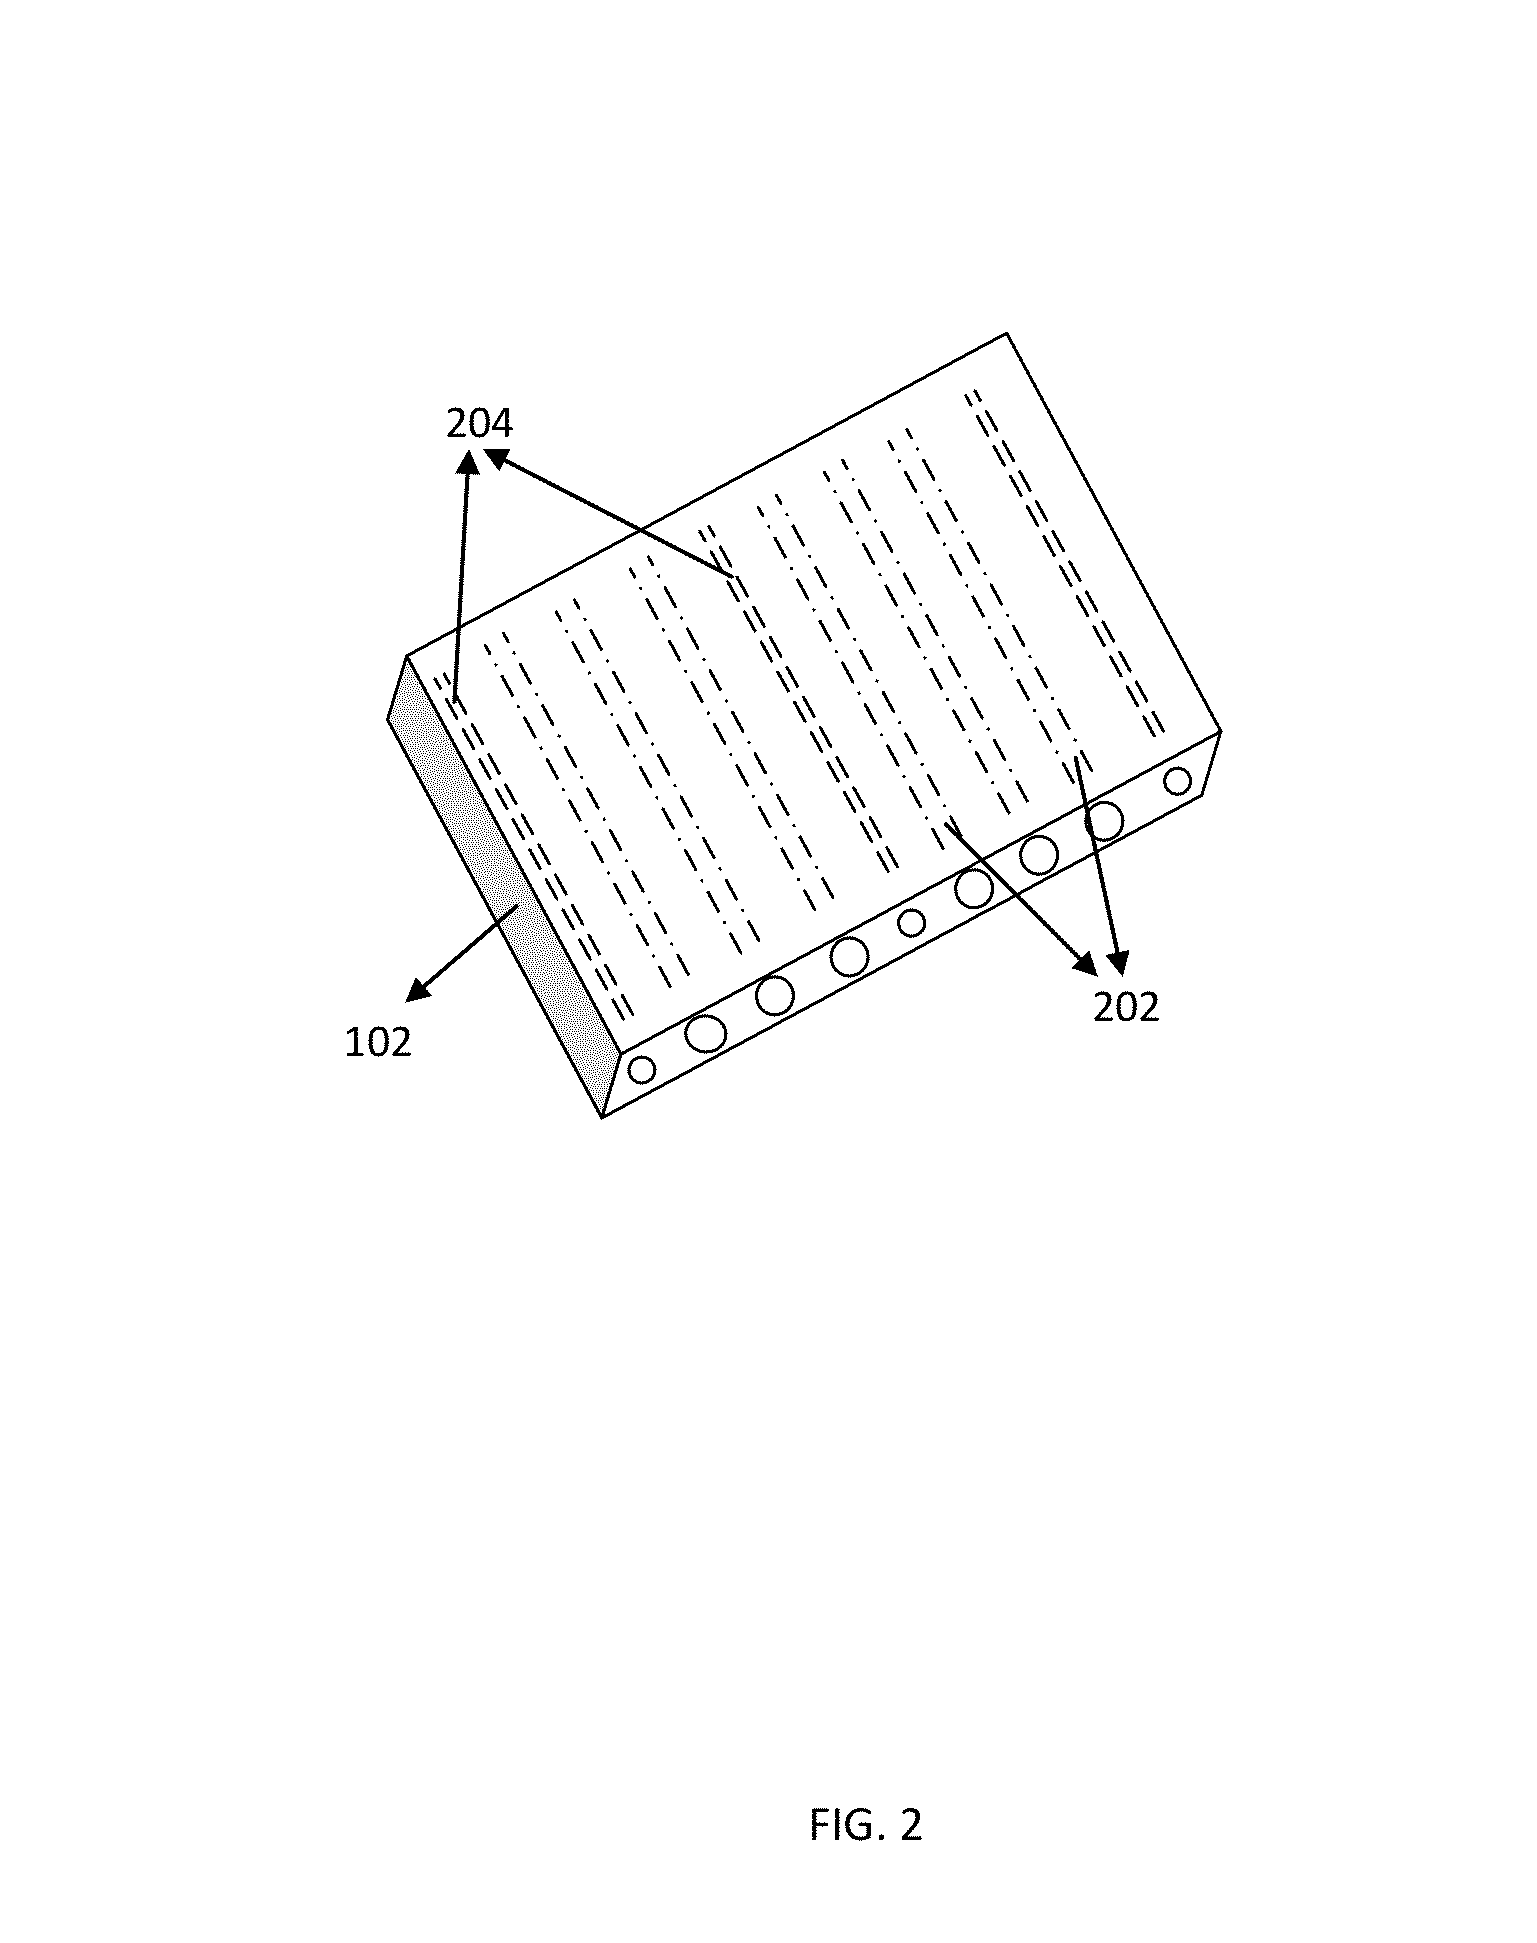 Heated build platform and system for three dimensional printing methods